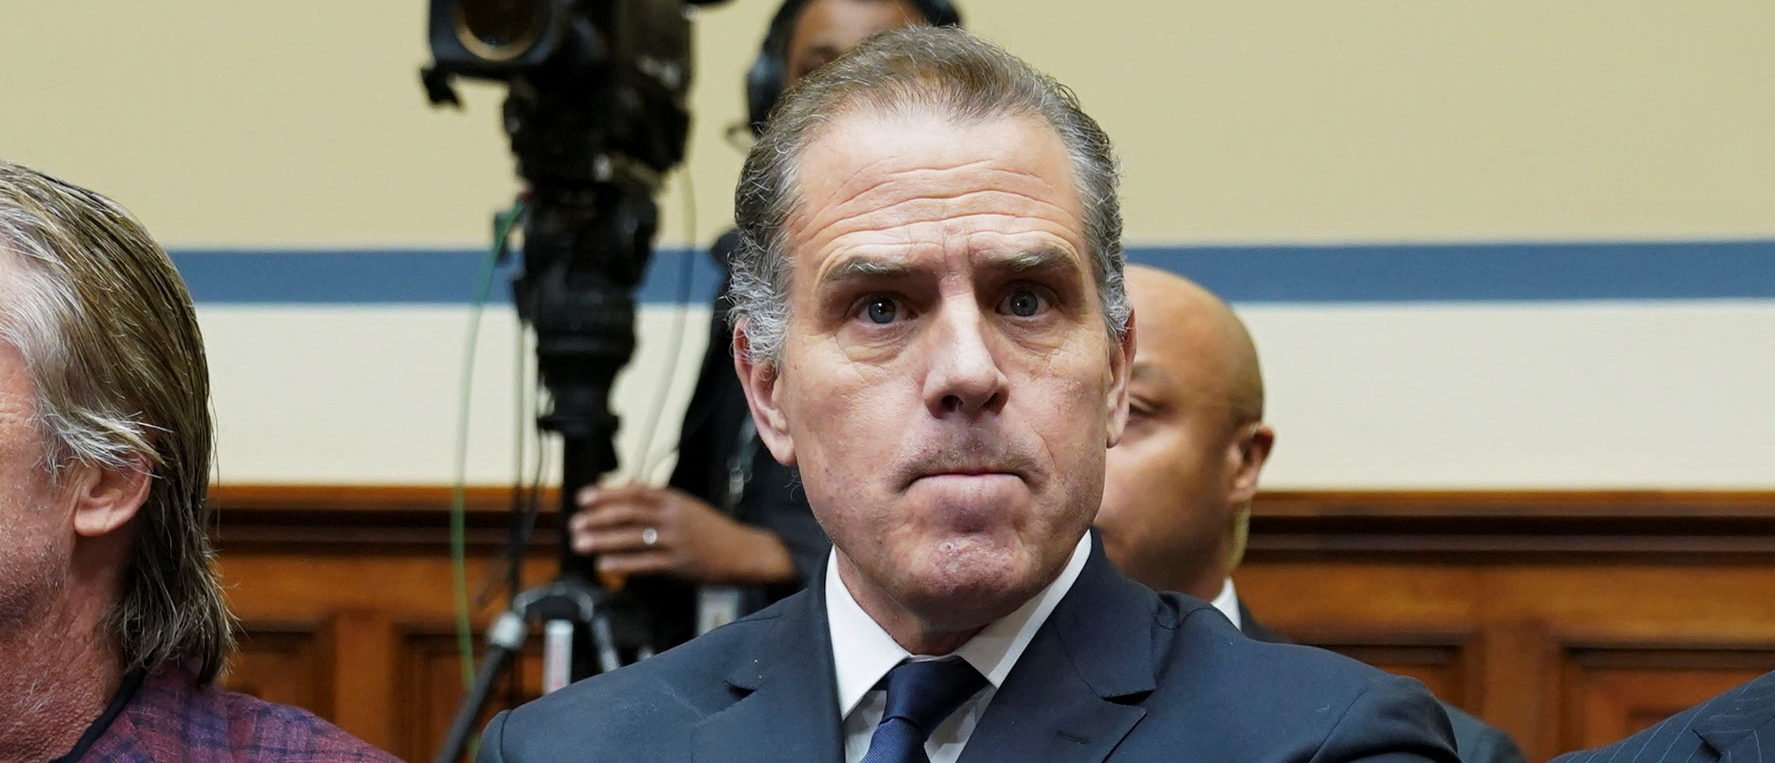 Hunter Biden, son of U.S. President Joe Biden, is seen as he makes a surprise appearance at a House Oversight Committee markup and meeting to vote on whether to hold Biden in contempt of Congress for failing to respond to a request to testify to the House last month, on Capitol Hill in Washington, U.S., January 10, 2024. REUTERS/Kevin Lamarque